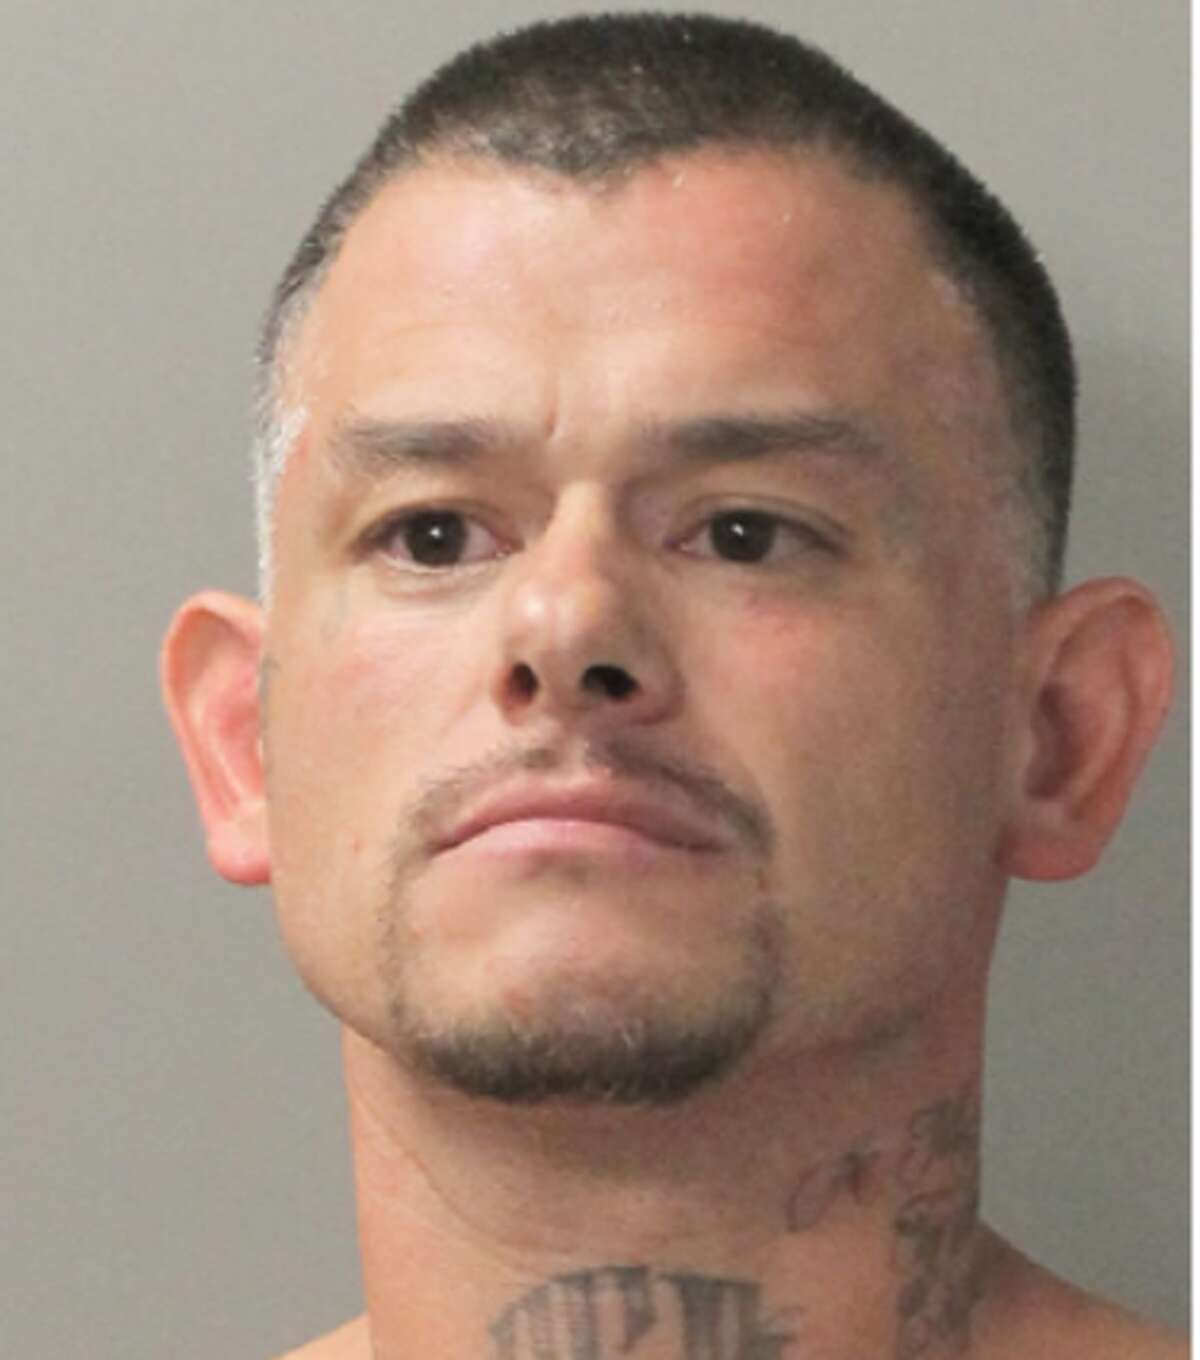 Guadalupe Toledo Vega has been charged with murder in the death of Morgan Sproles on Dec. 4, 2018.